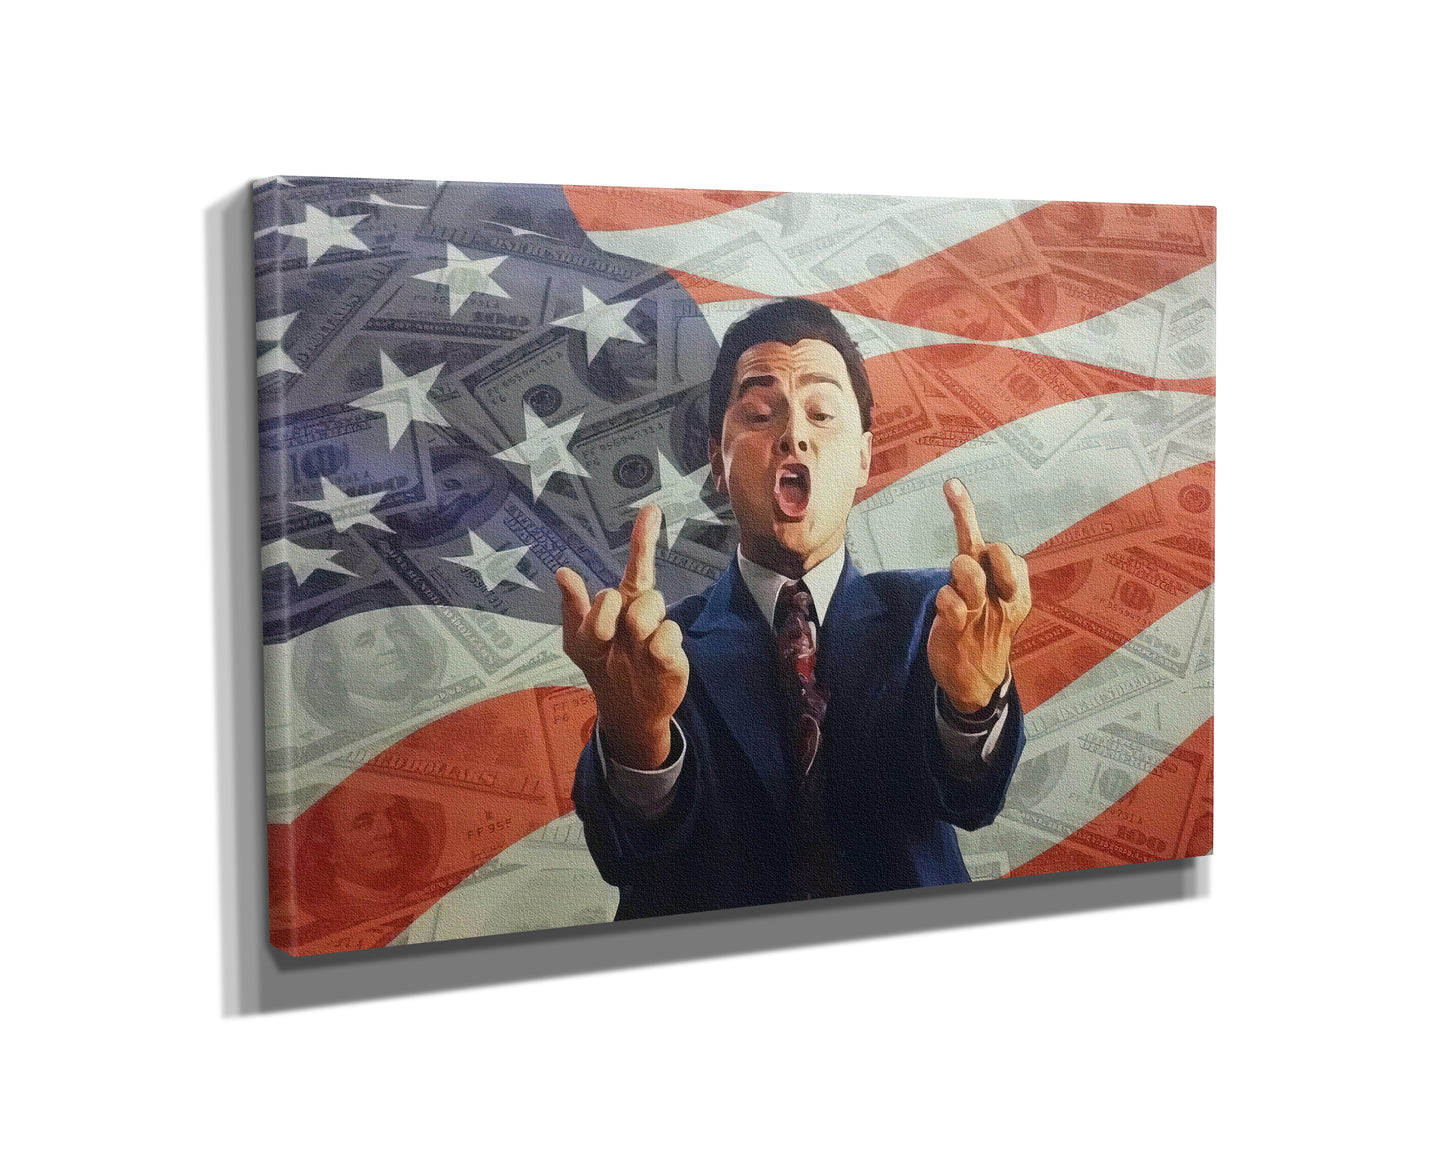 The Wolf of Wall Street 'middle finger' Poster Leonardo Di Caprio Movie Illustration Hand Made Posters Canvas Print Wall Art Home Decor